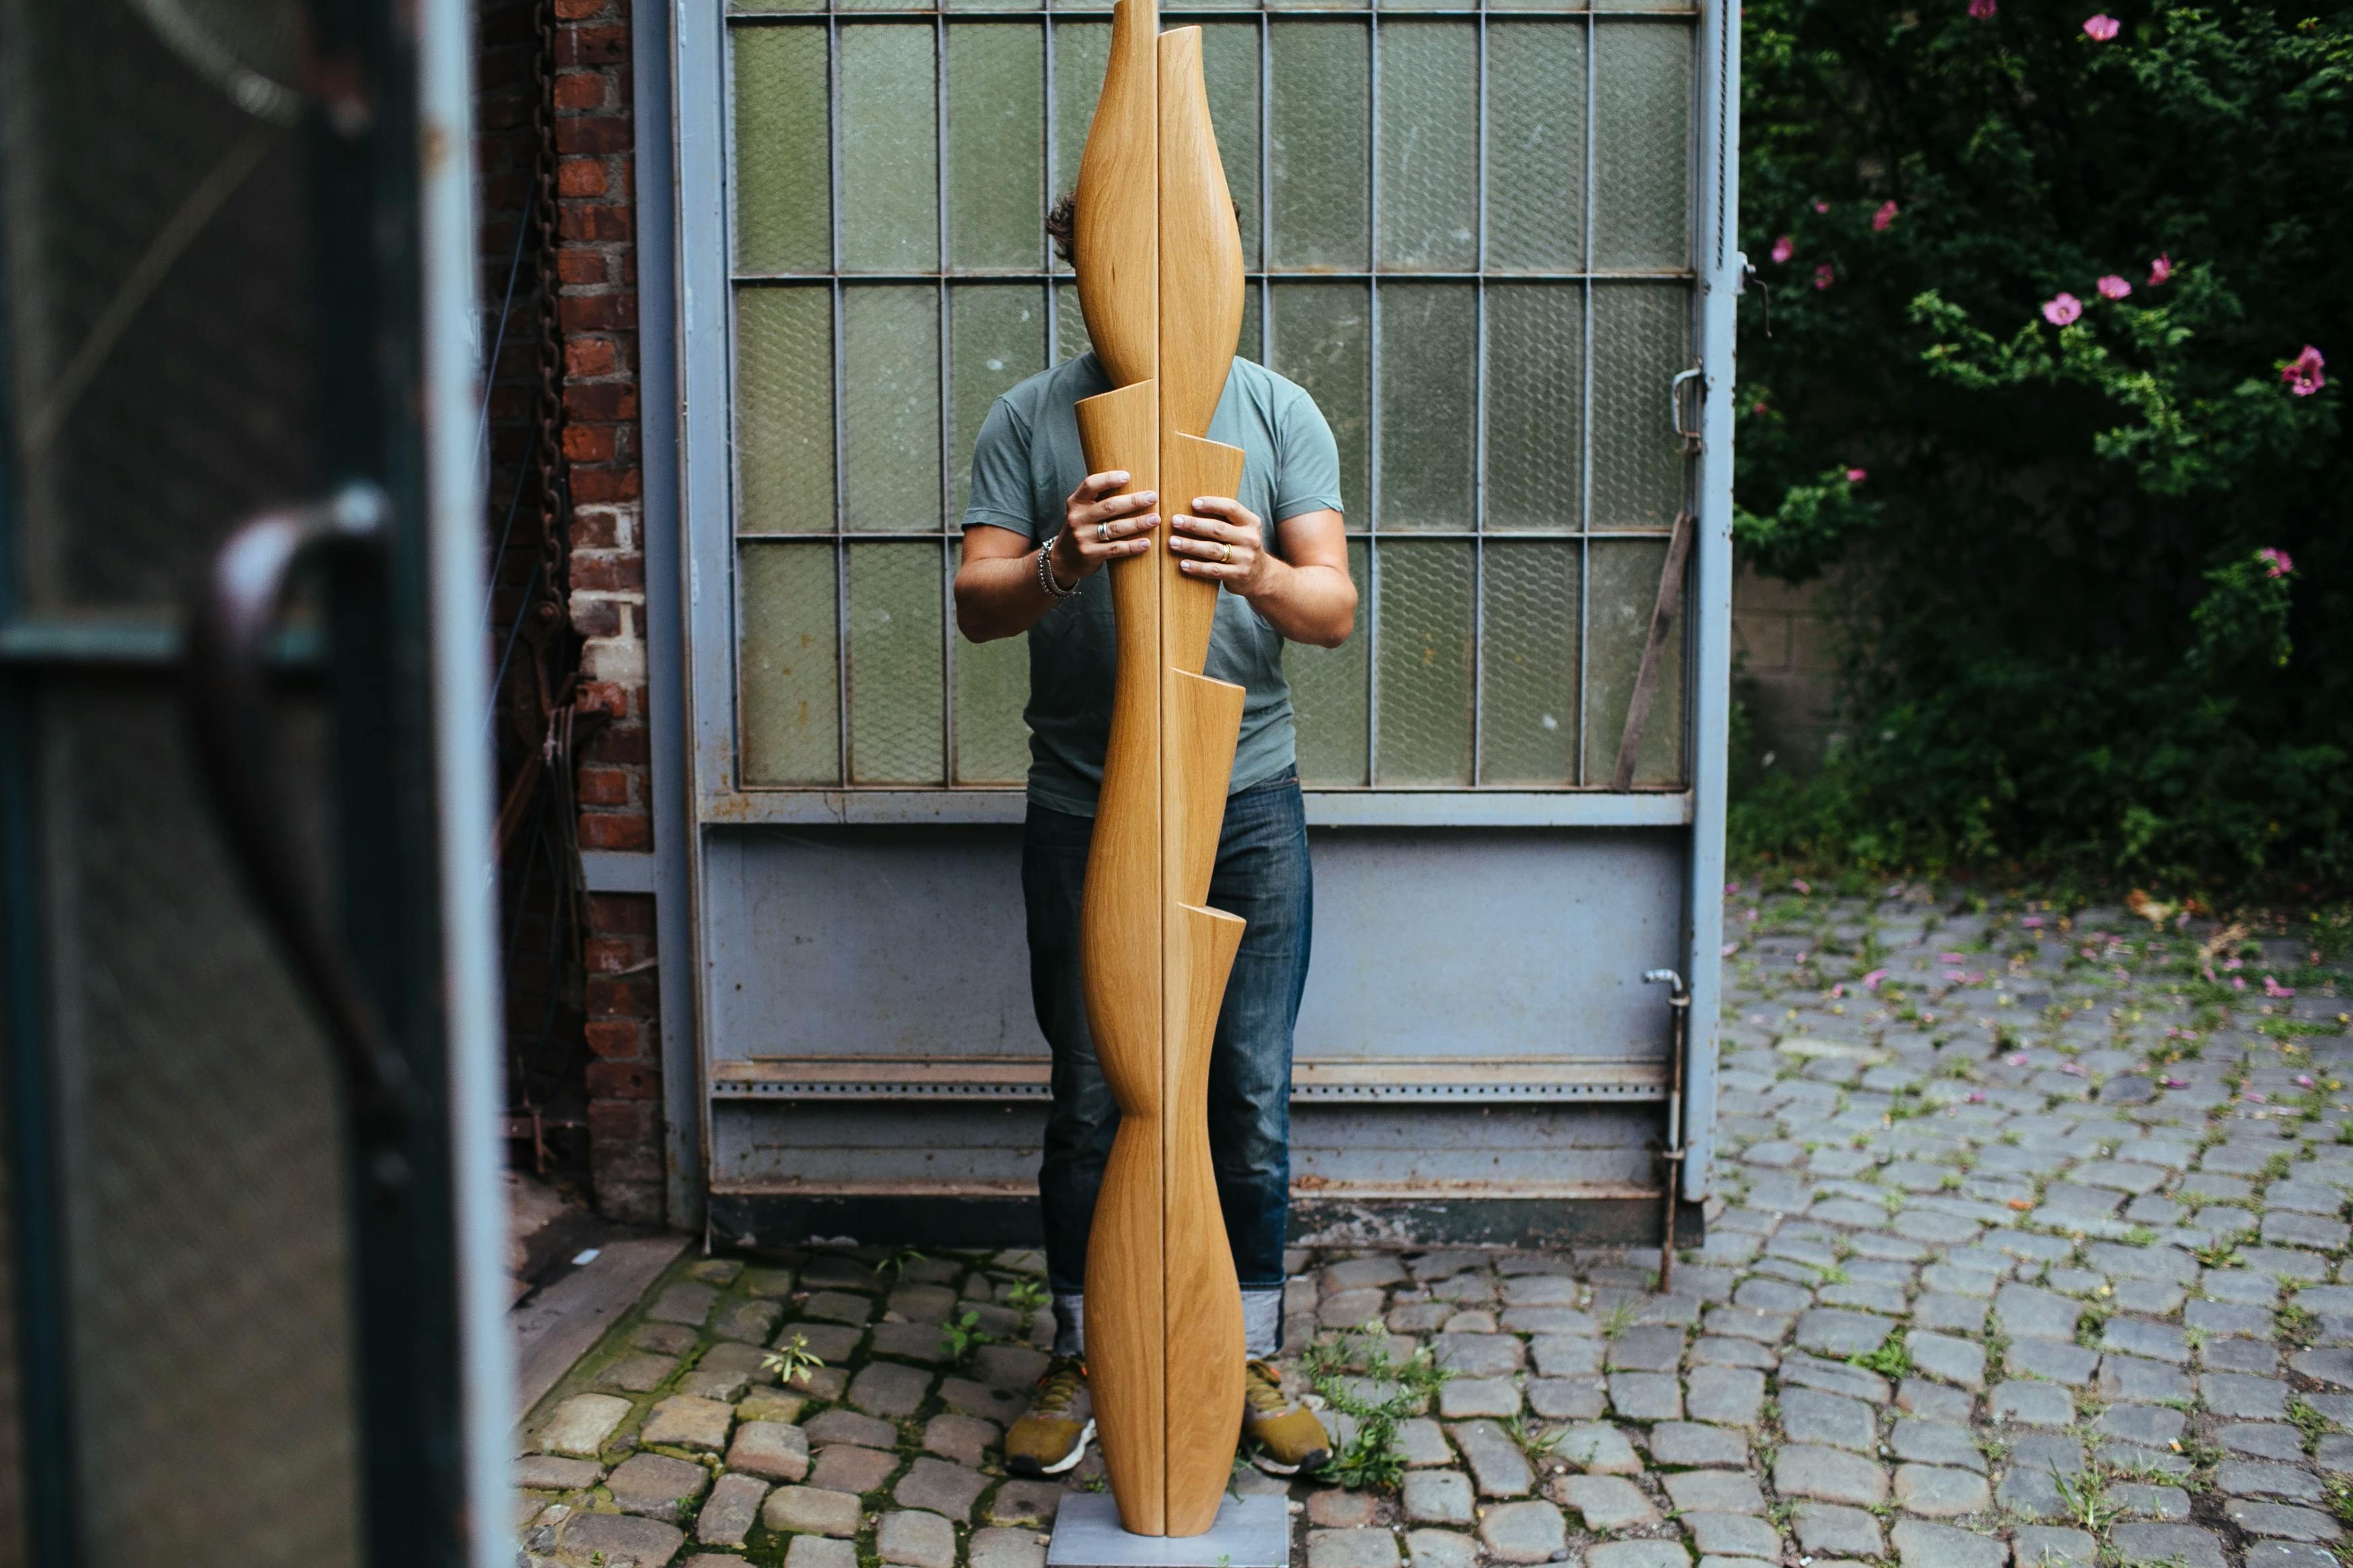 Artist Fitzhugh Karol standing outside his studio on cobblestone pavers holding a tall wooden sculpture.